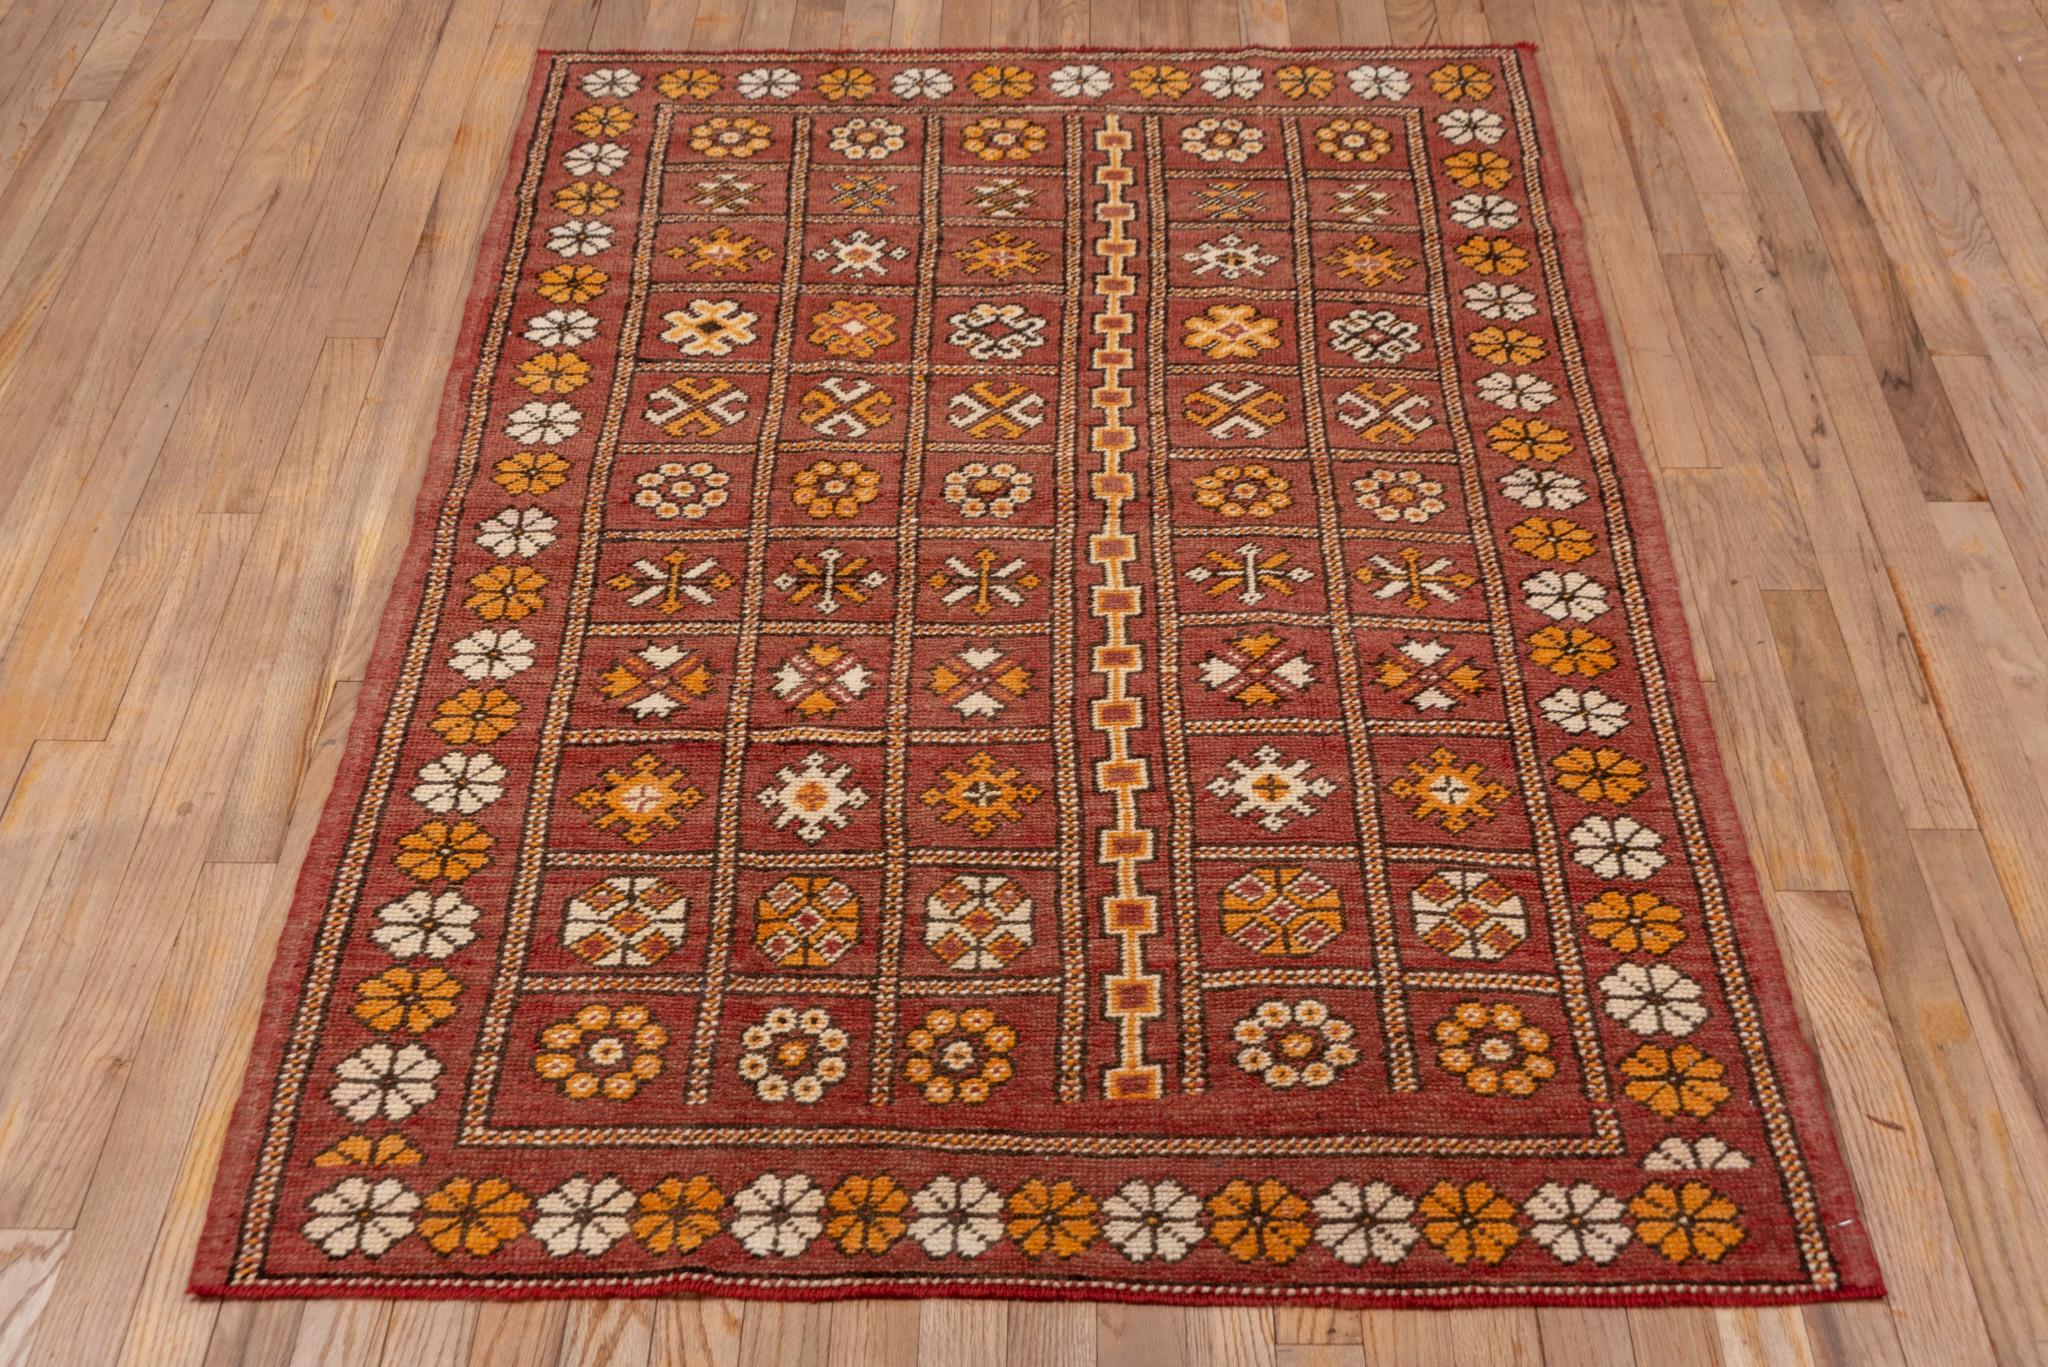 An Oushak Rug circa 1930. Handknotted with 100% wool yarn.